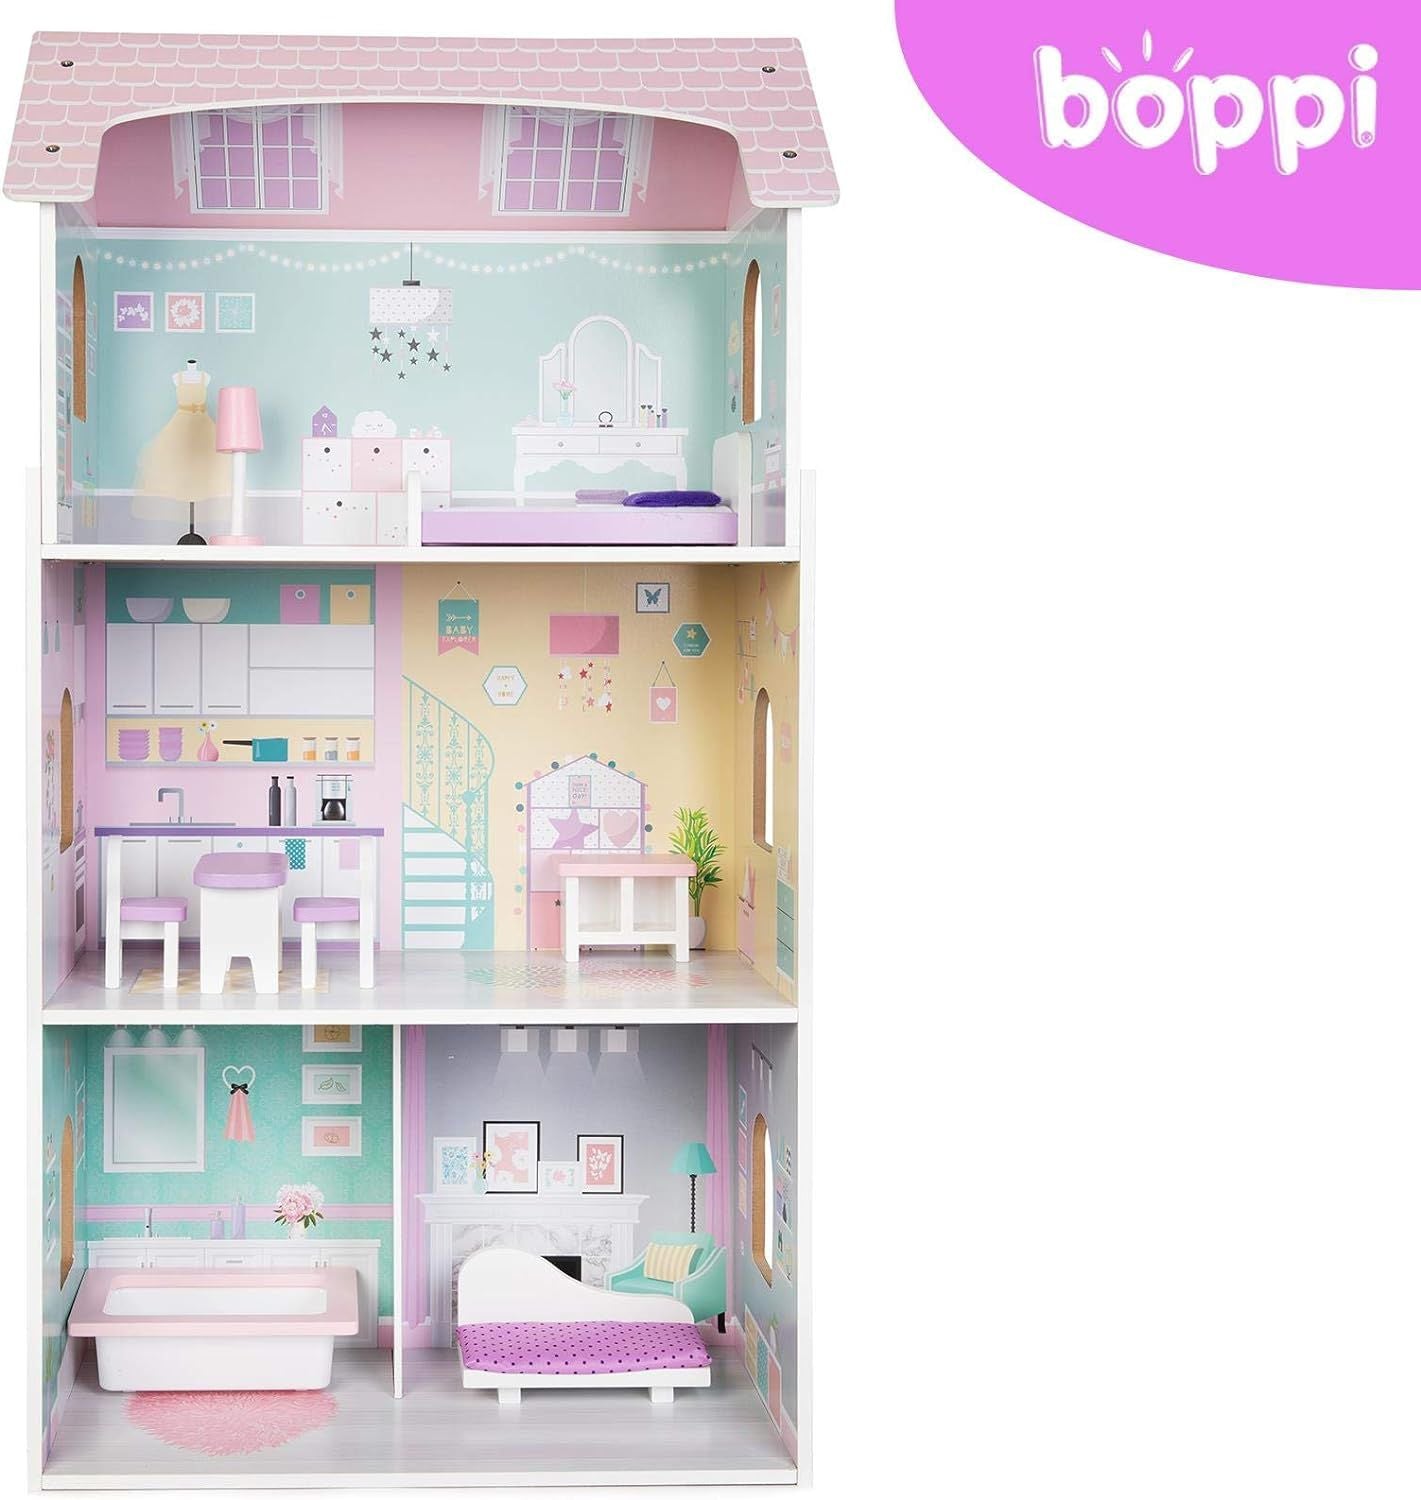 Anna's Wooden Doll House